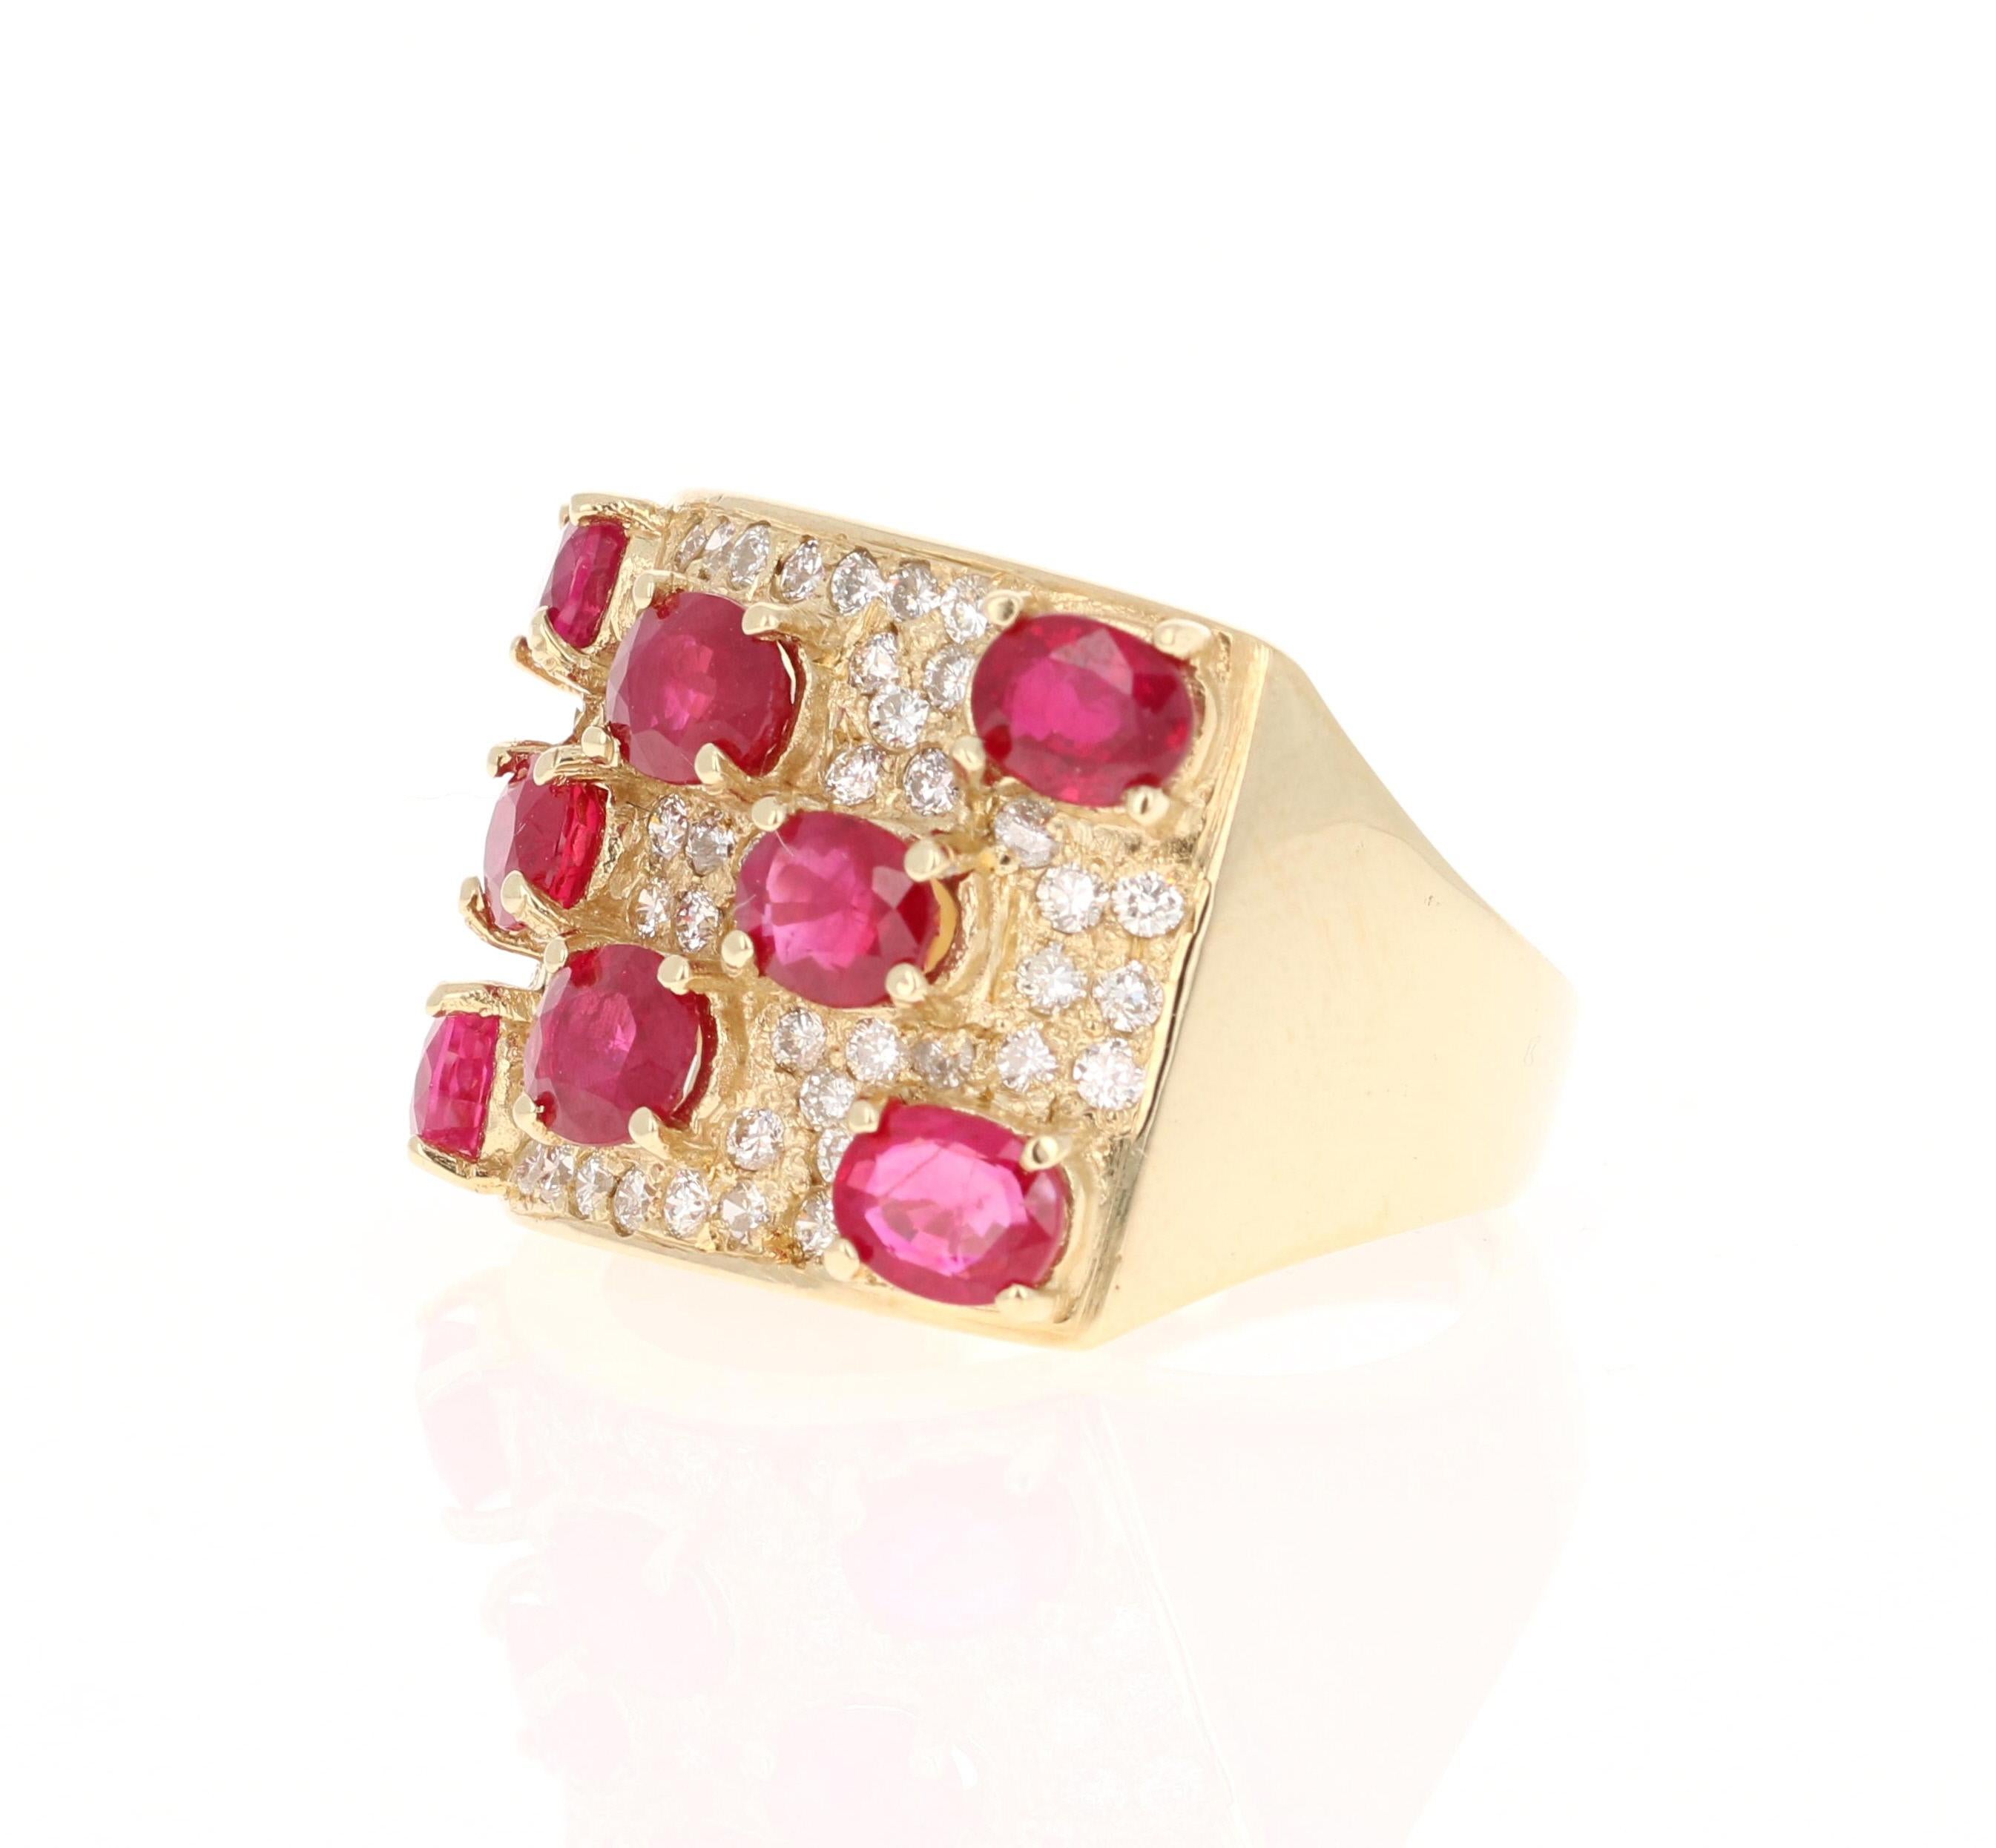 Contemporary 3.74 Carat Ruby Diamond 14 Karat Yellow Gold Cocktail Ring For Sale